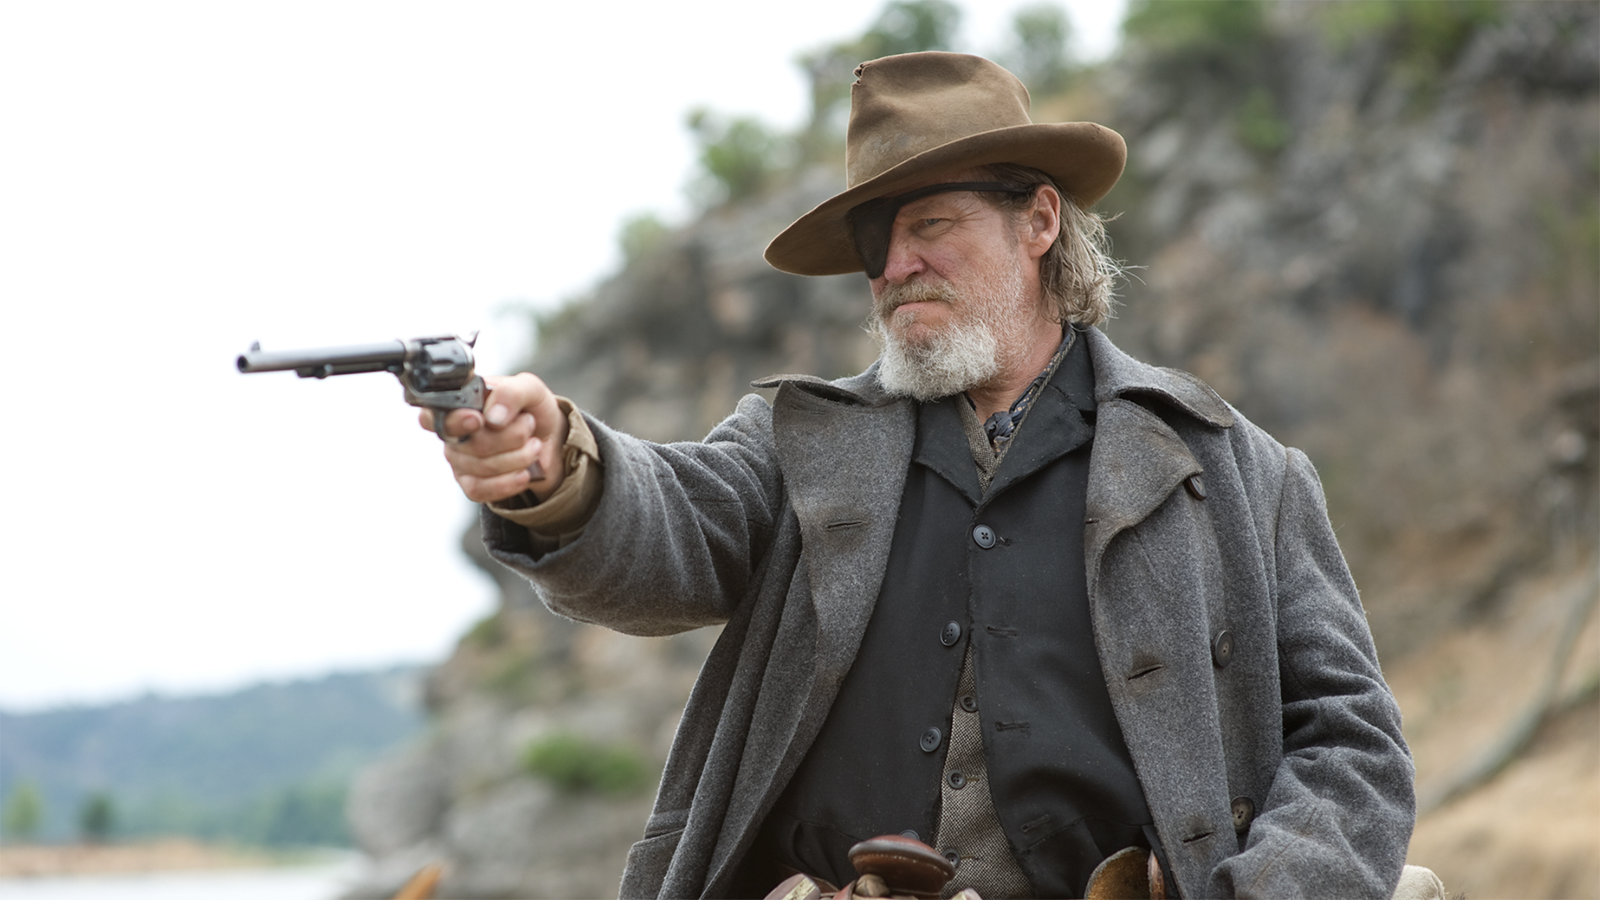 A still from the movie True Grit in which Jeff Bridges' character Deputy U.S. Marshal Rooster Cogburn points a gun off-camera.